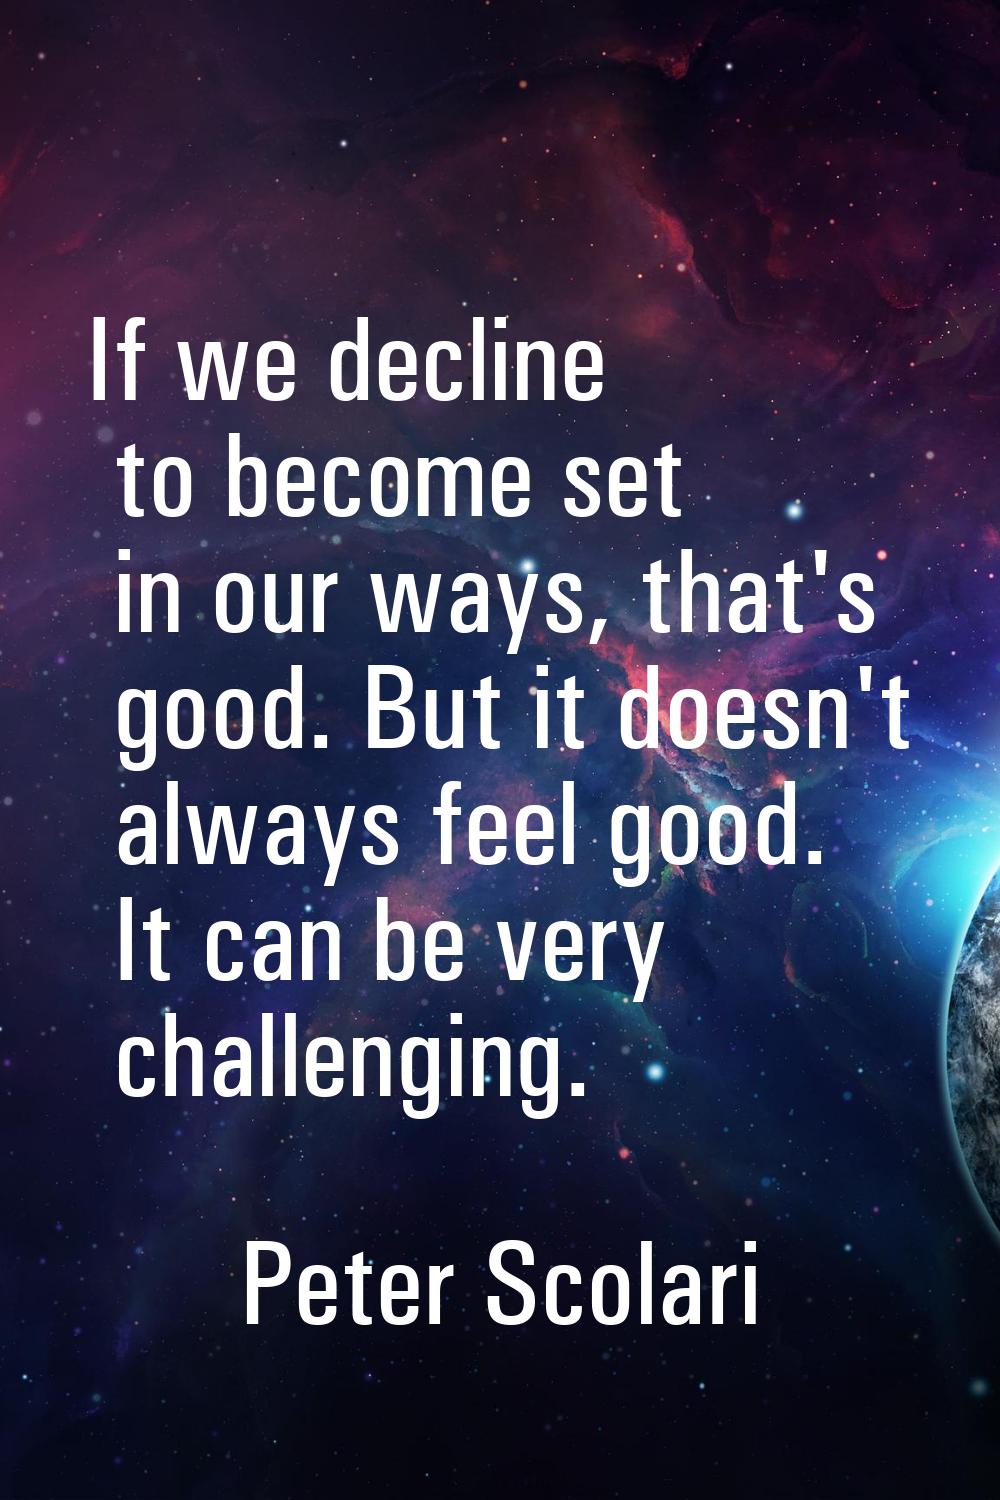 If we decline to become set in our ways, that's good. But it doesn't always feel good. It can be ve